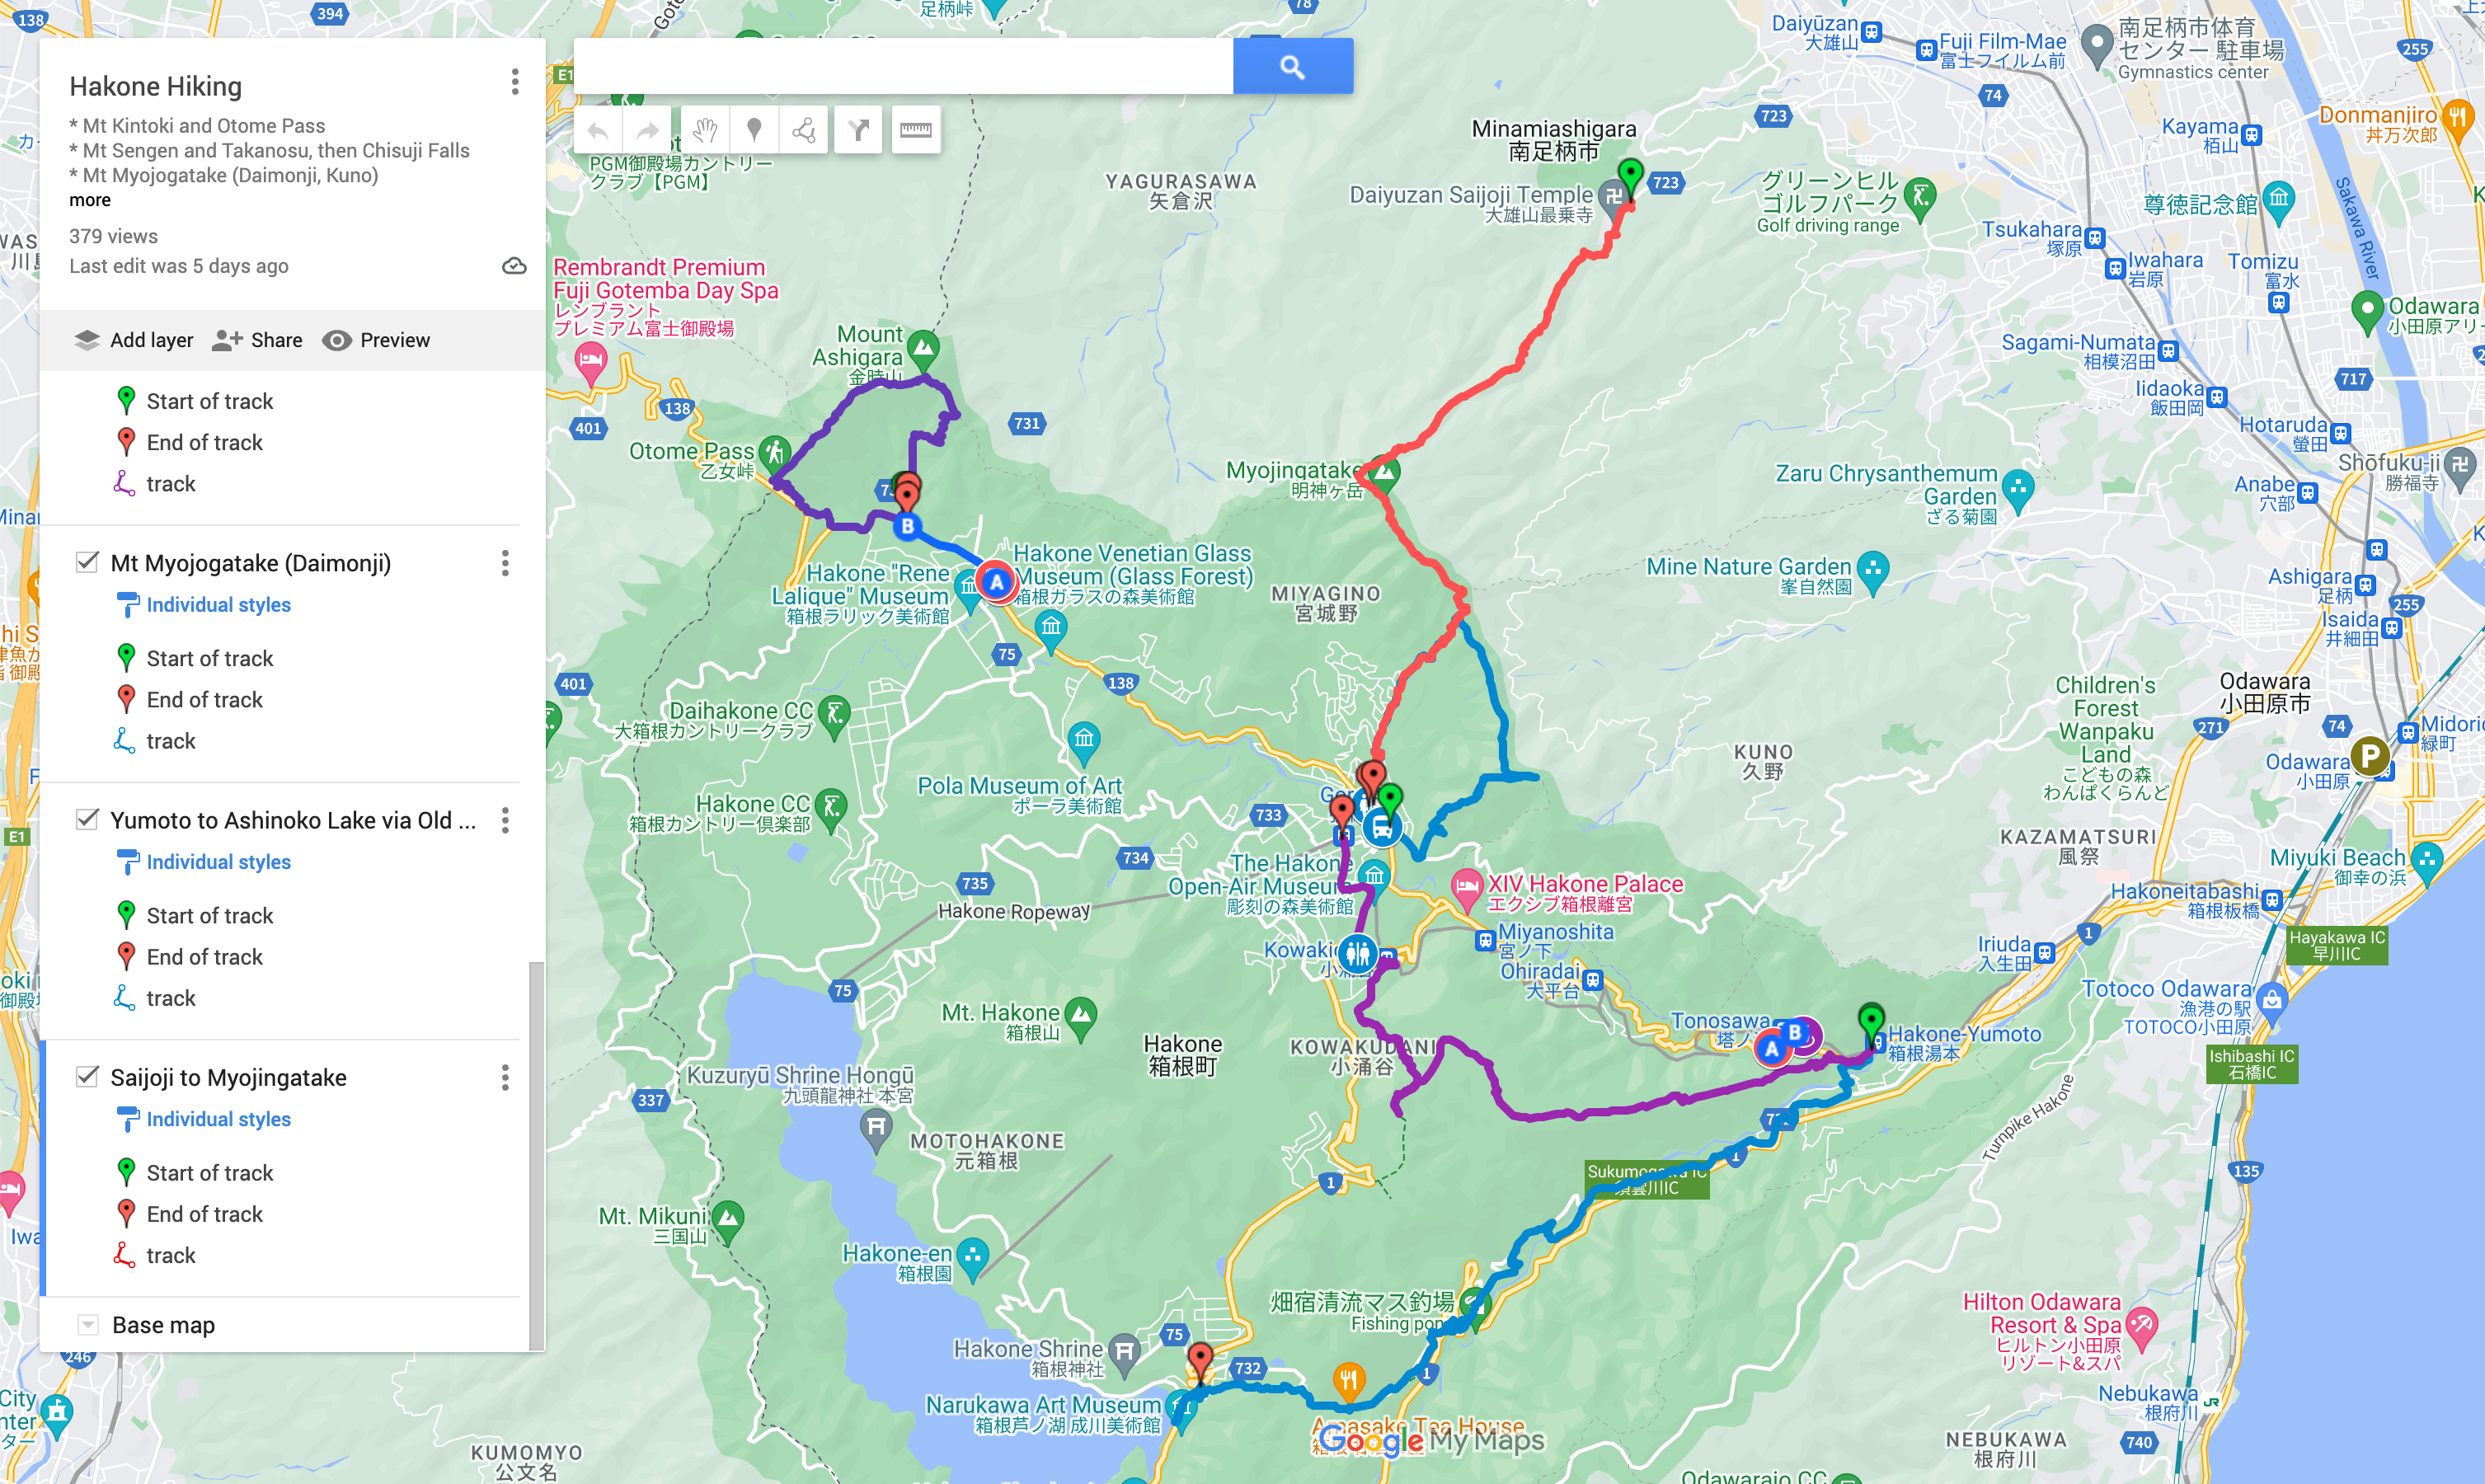 Map of Hakone hikes, with today’s highlighted.